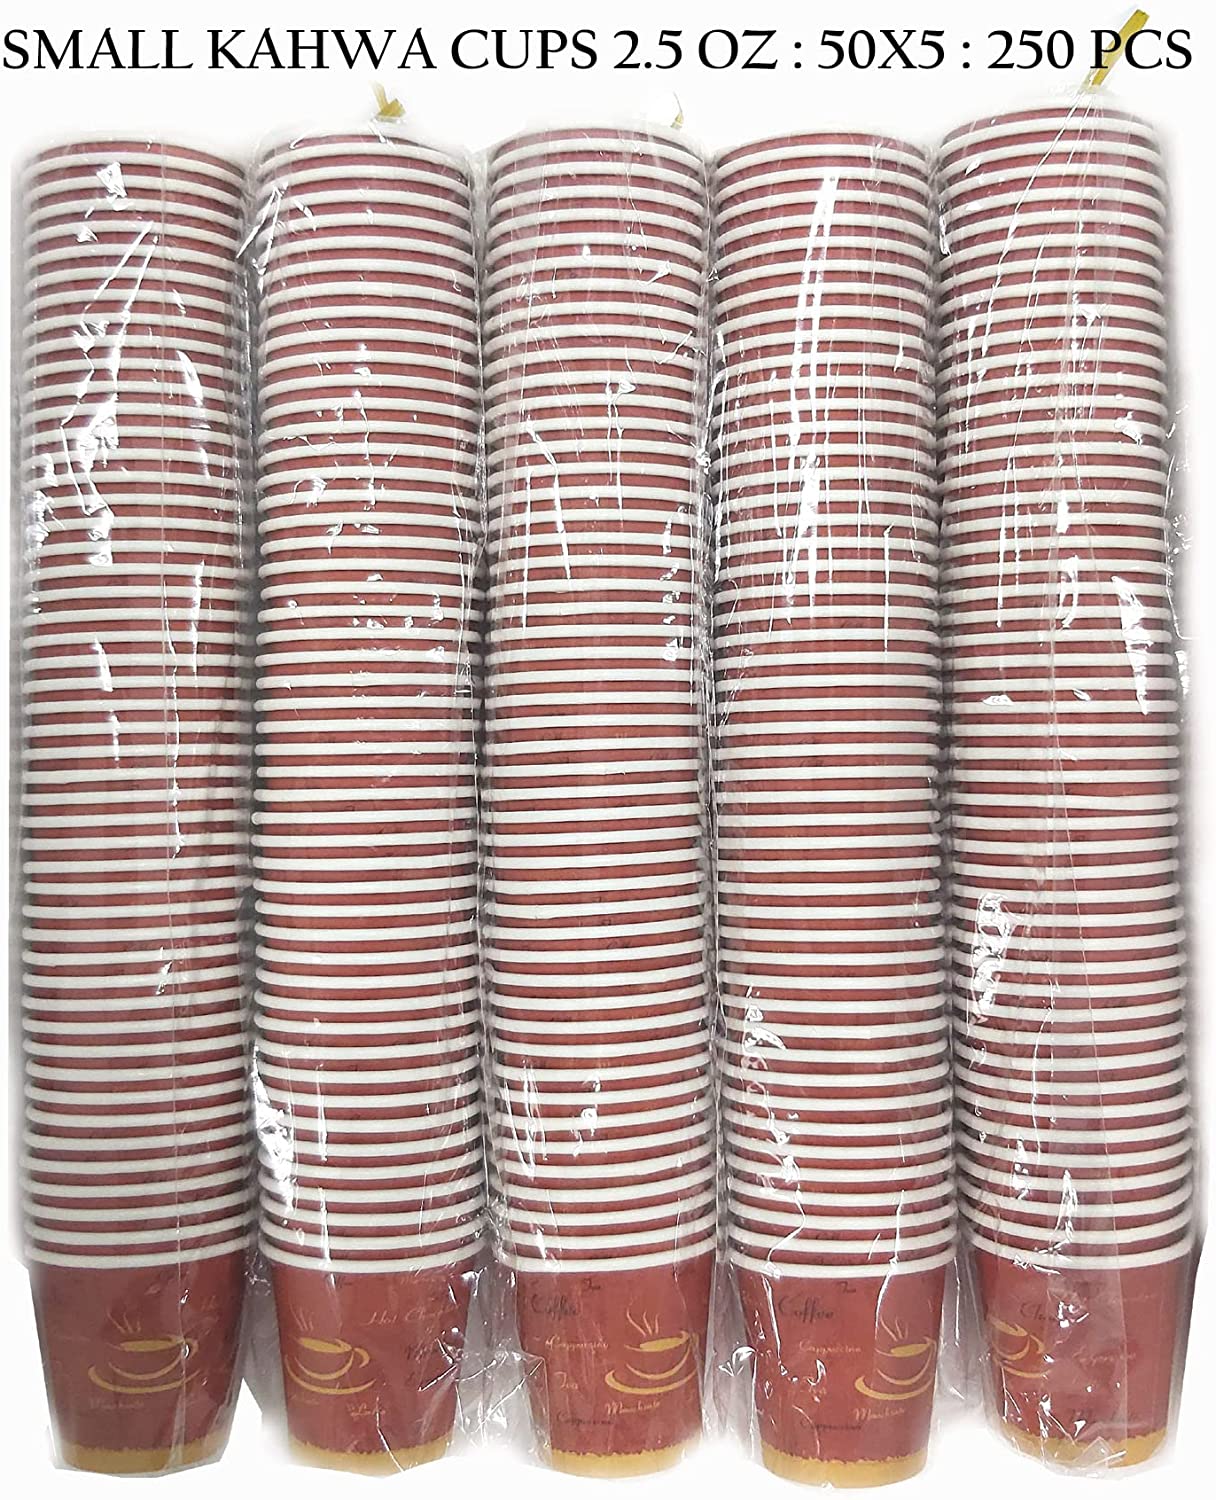 AL SAQER 250-Piece (5 SETTS) Paper Kahwa Cups 2.5oz-(Very Small)Disposable Tea Cups and Cawa cups